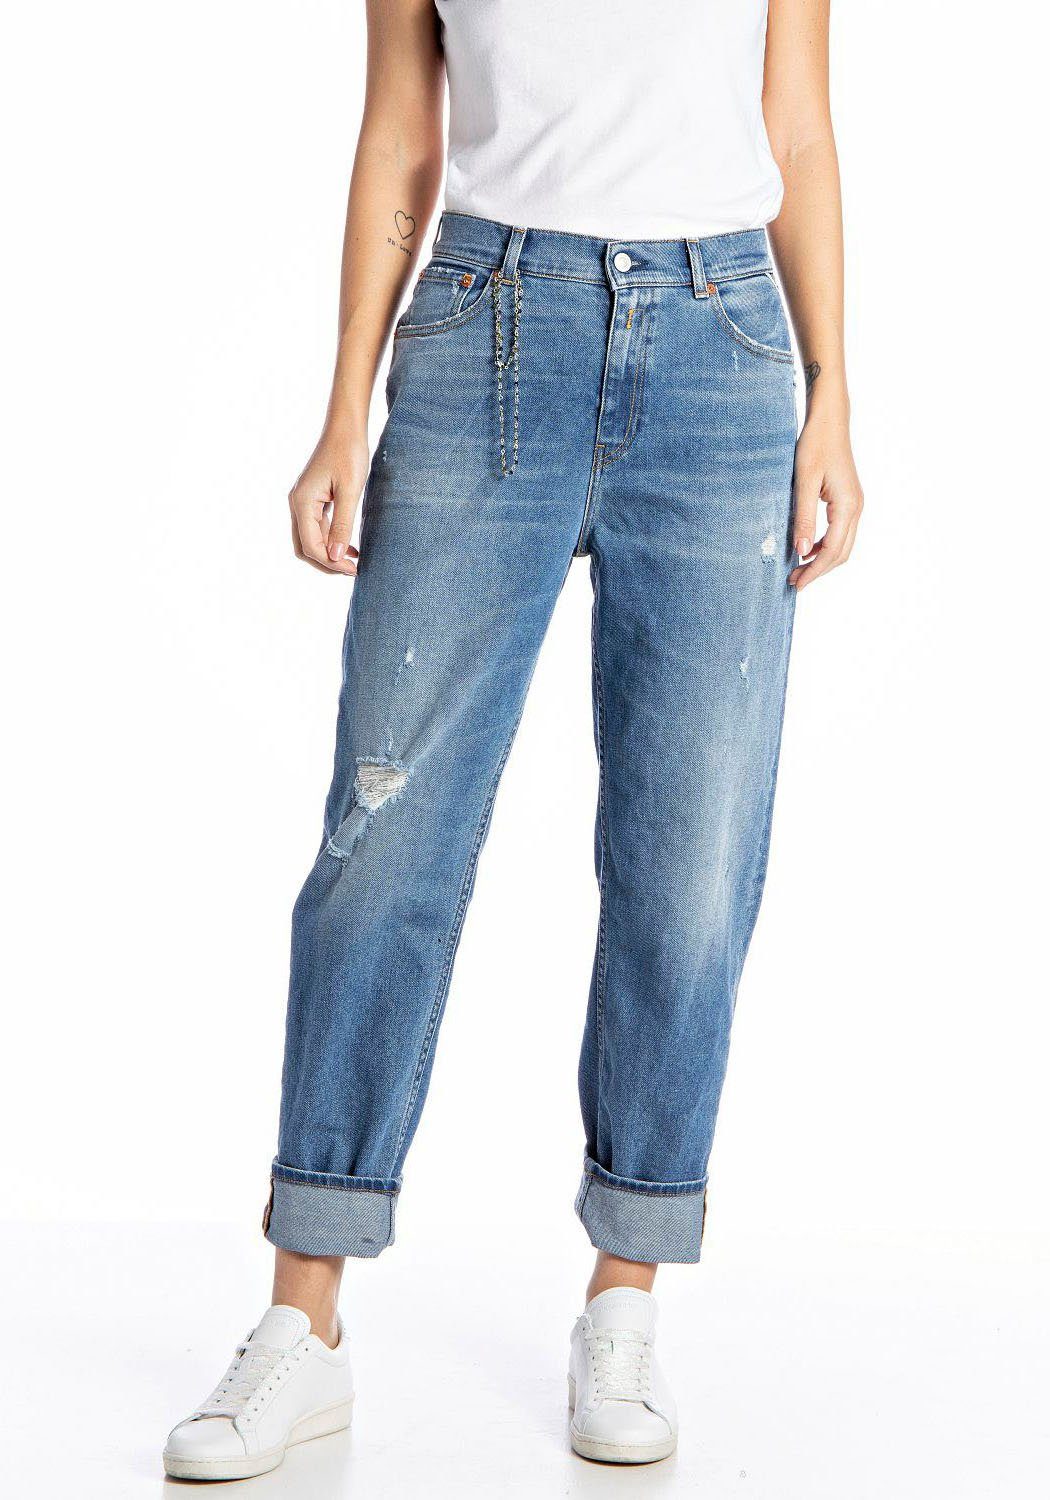 Used mit KILEY Replay Kettendetail im Look Straight-Jeans